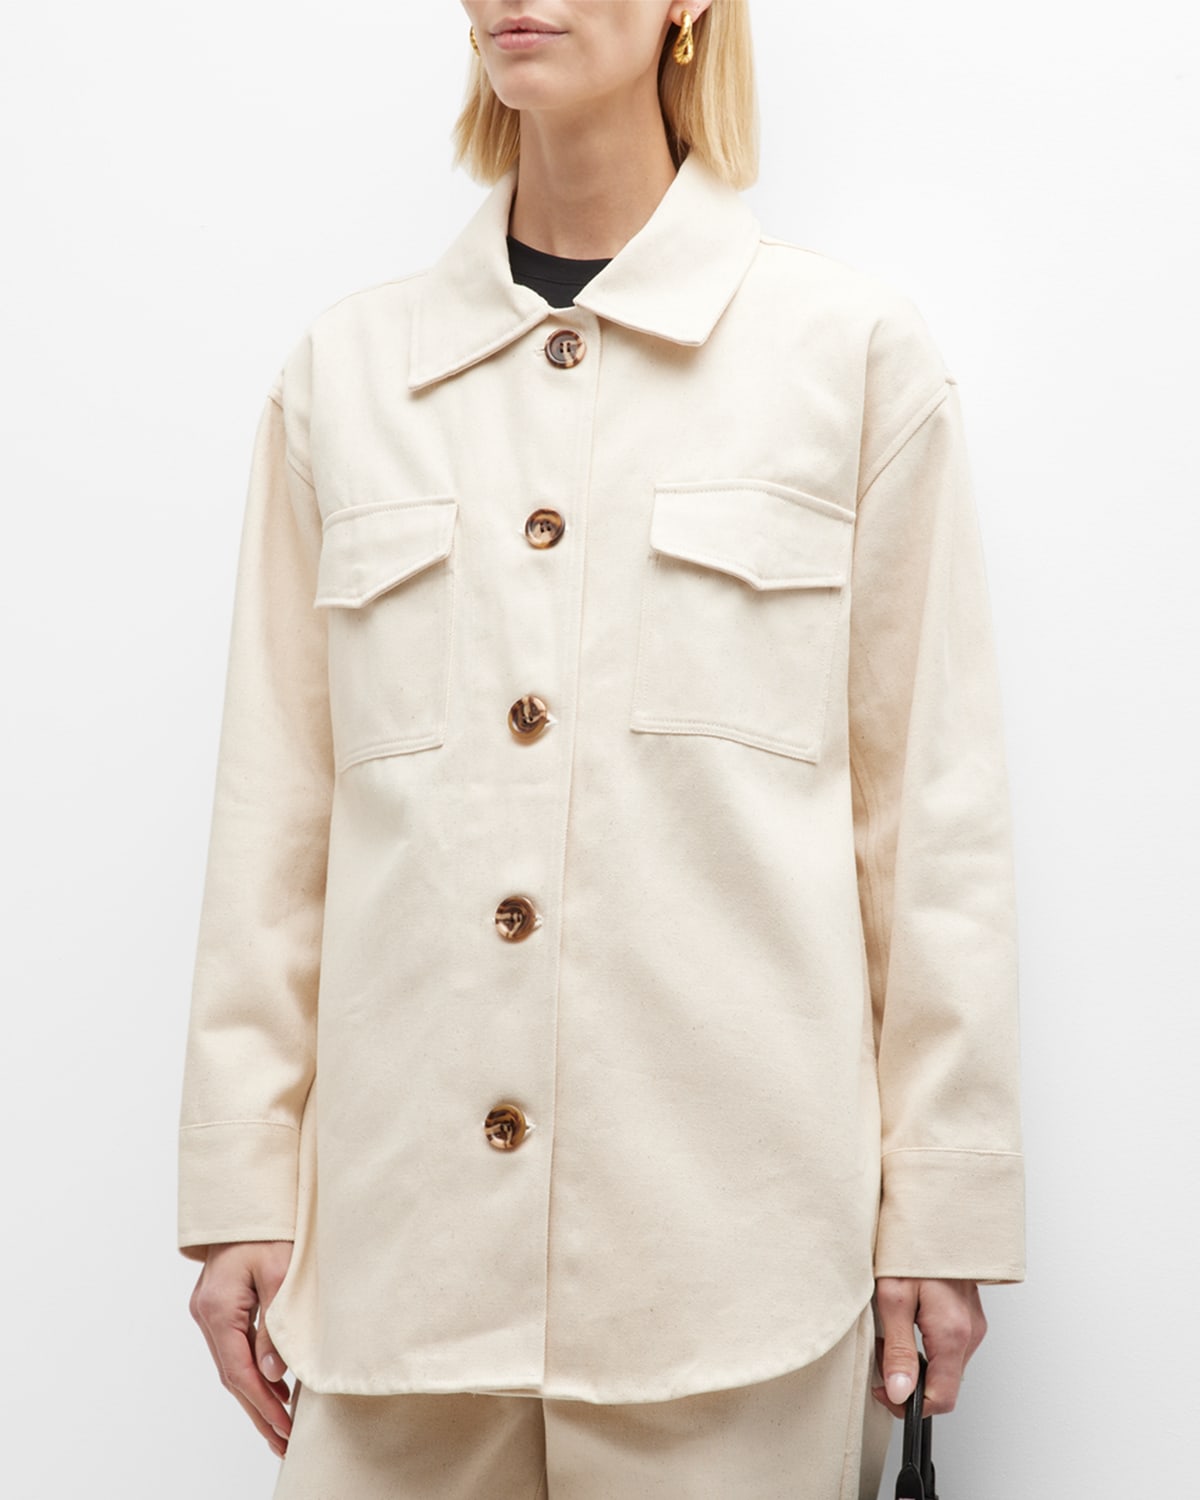 LAUDE the Label Roan Oversized Button-Down Shirt Jacket